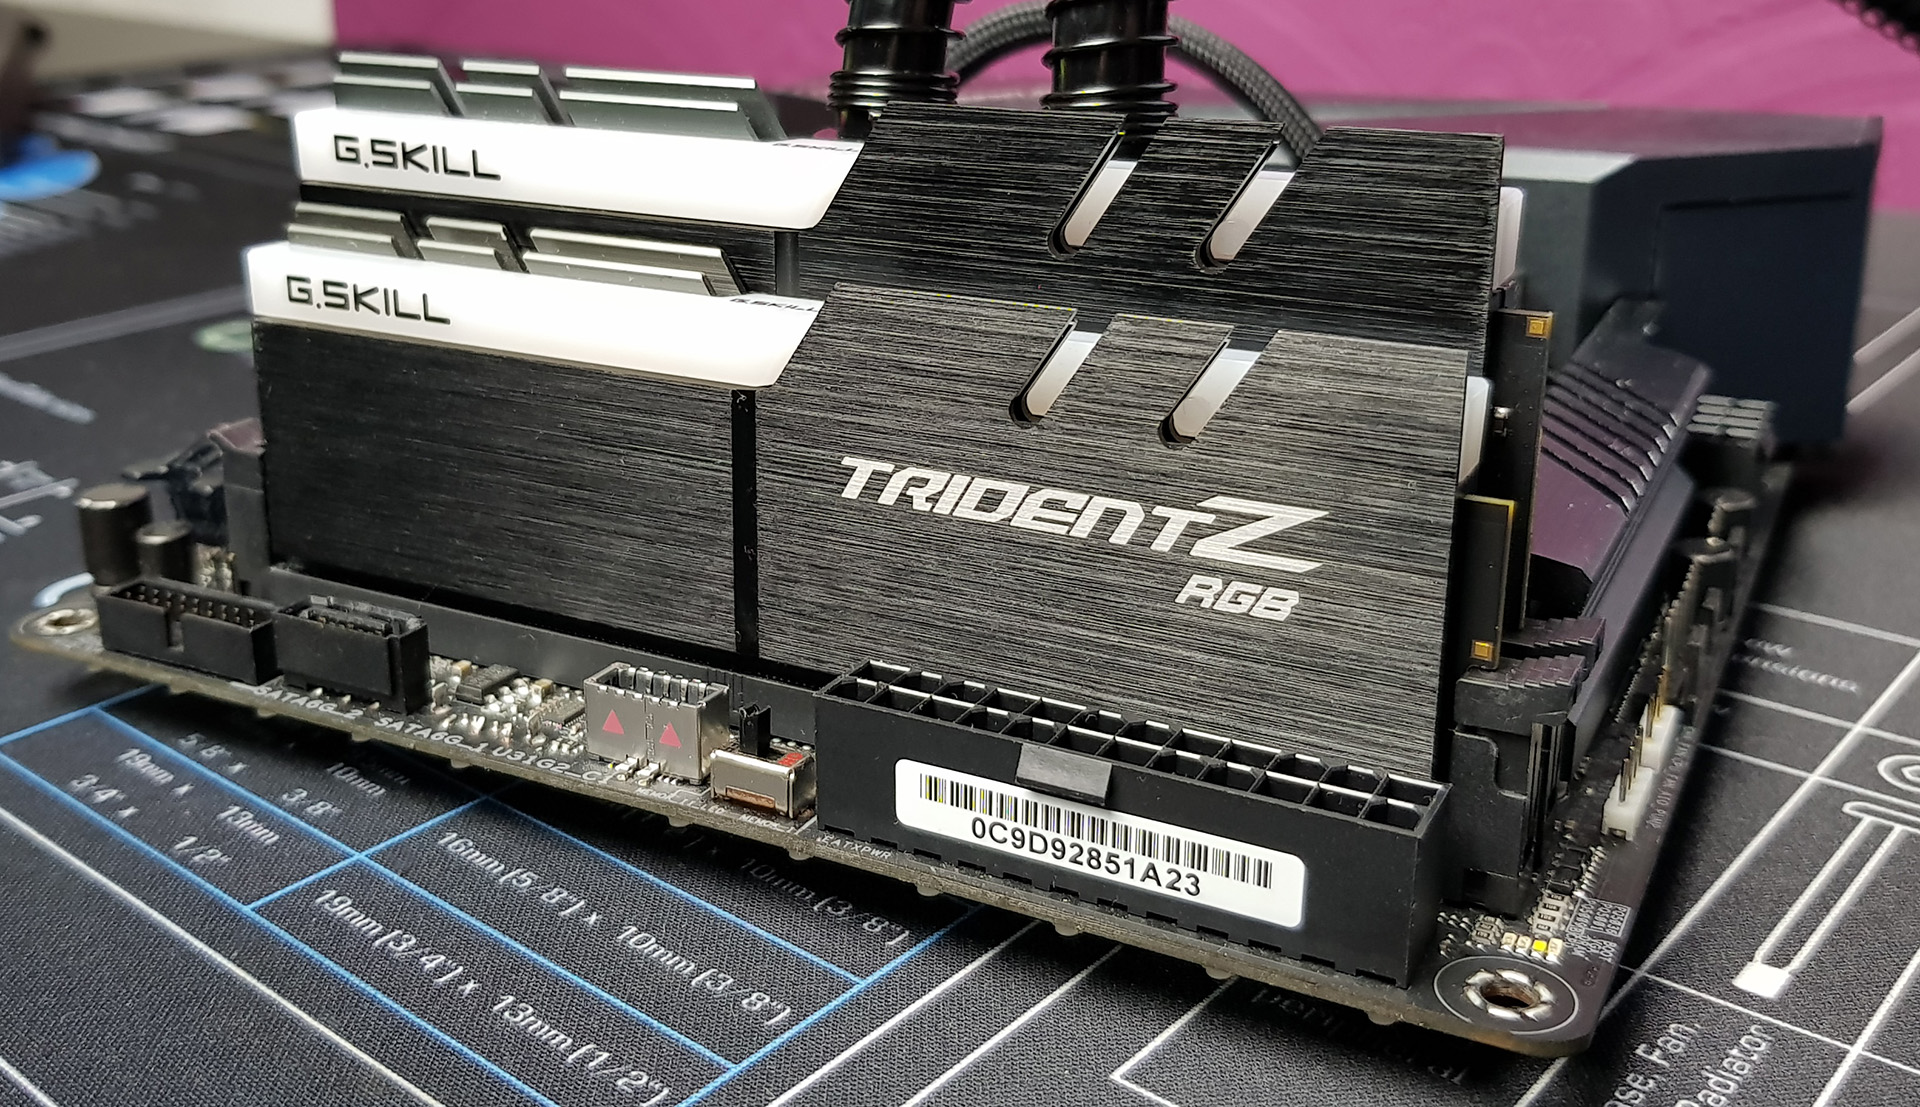 G Skill Tridentz Rgb Dc Overview Double Height Ddr4 32gb Modules From G Skill And Zadak Reviewed